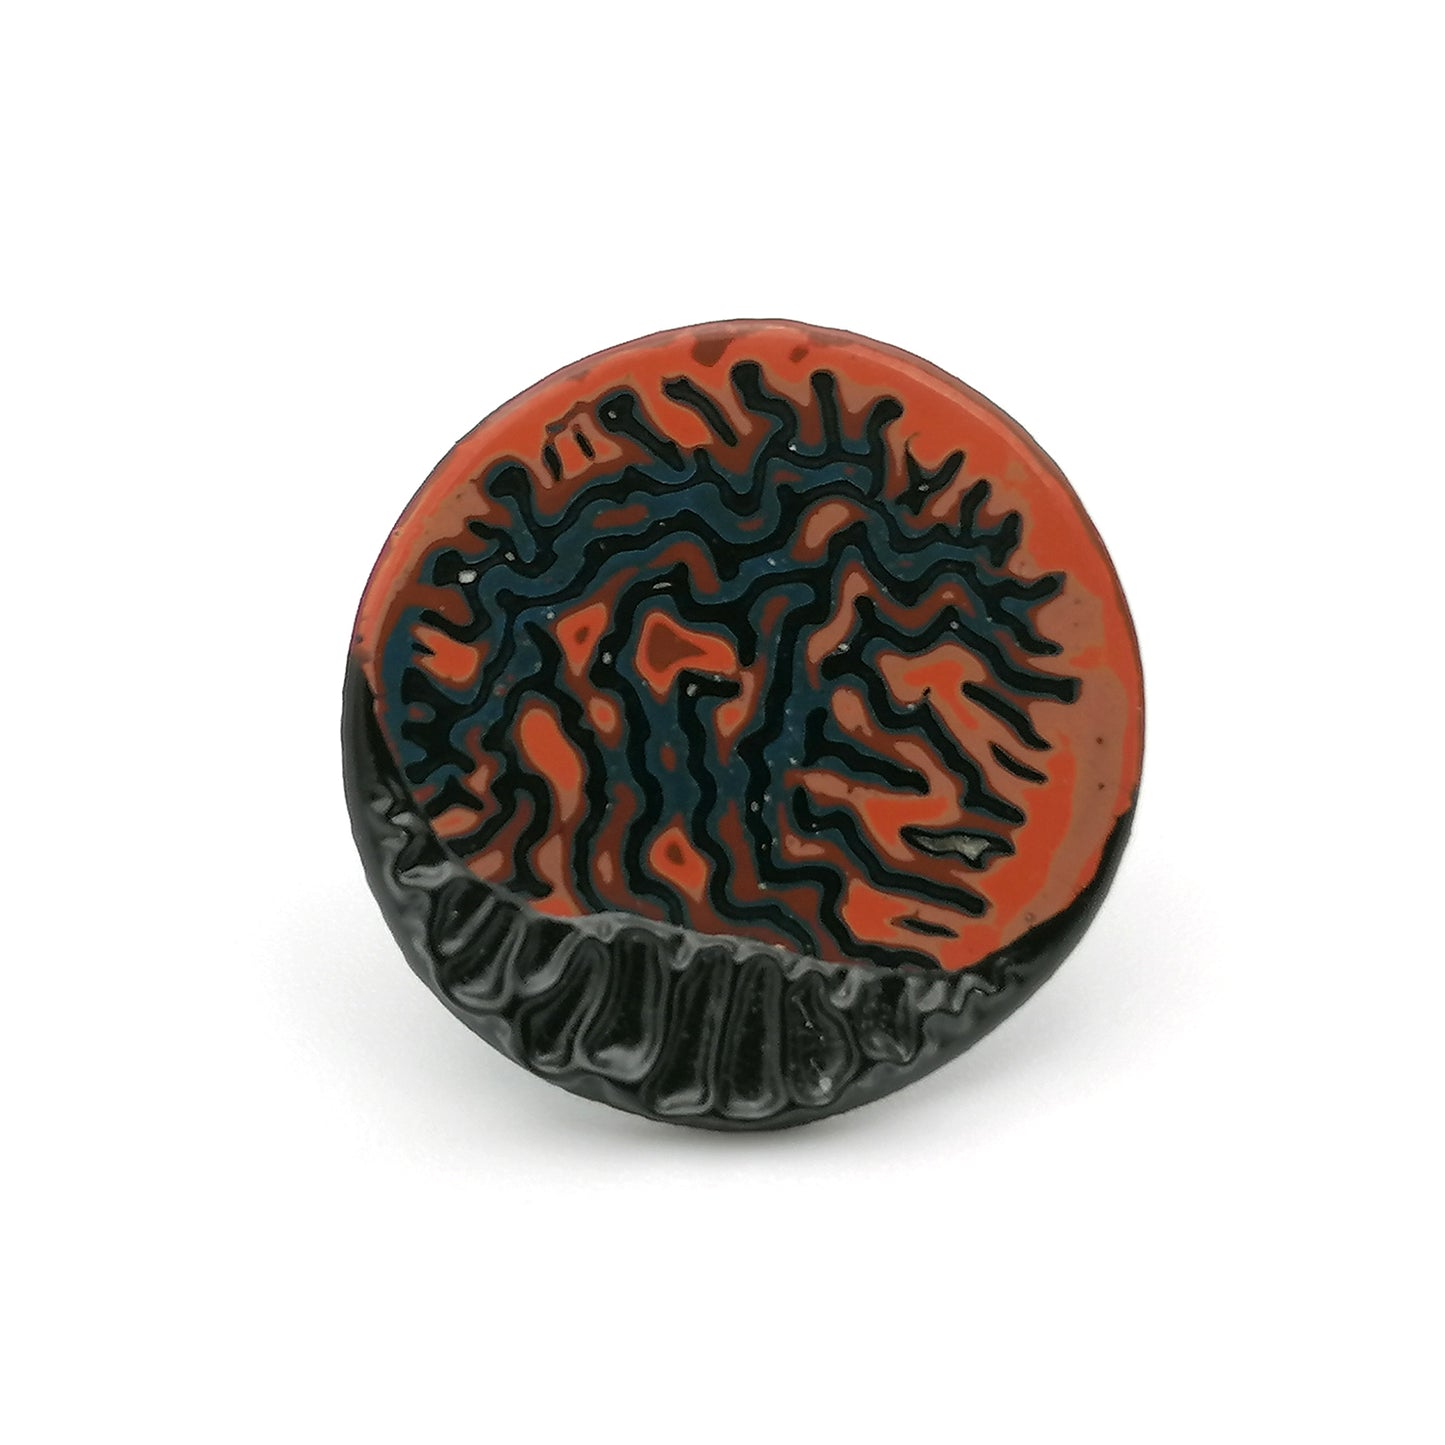 Image shows a single circle stud earring on a white background. With a wrinkled pattern in orange, blue and red and a raised black winkle textured rim.